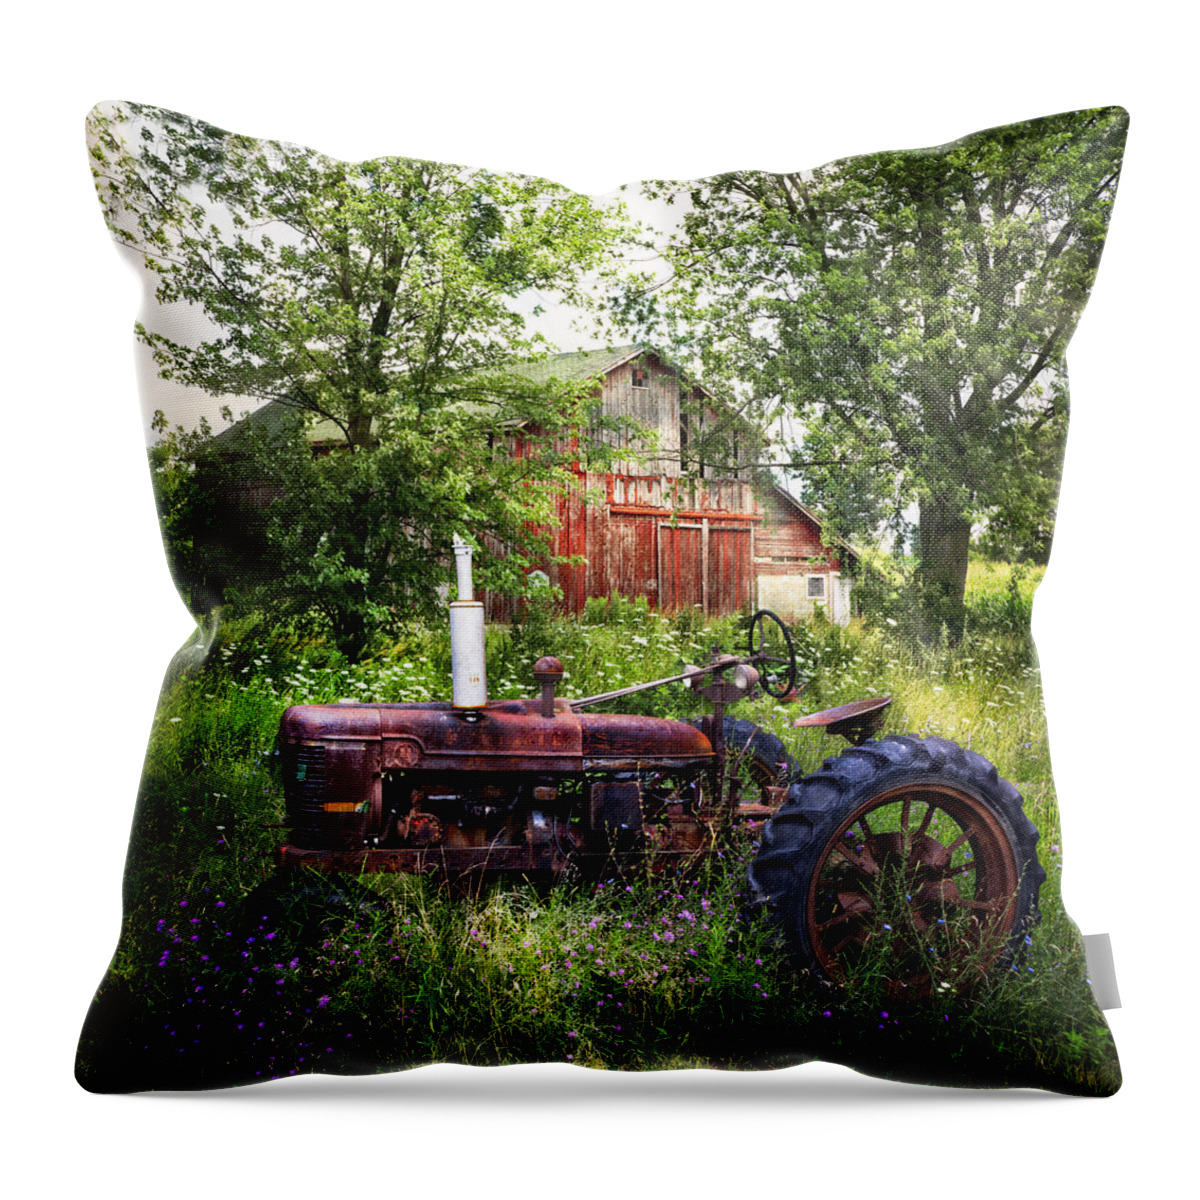 Barn Throw Pillow featuring the photograph Back to Nature by Debra and Dave Vanderlaan